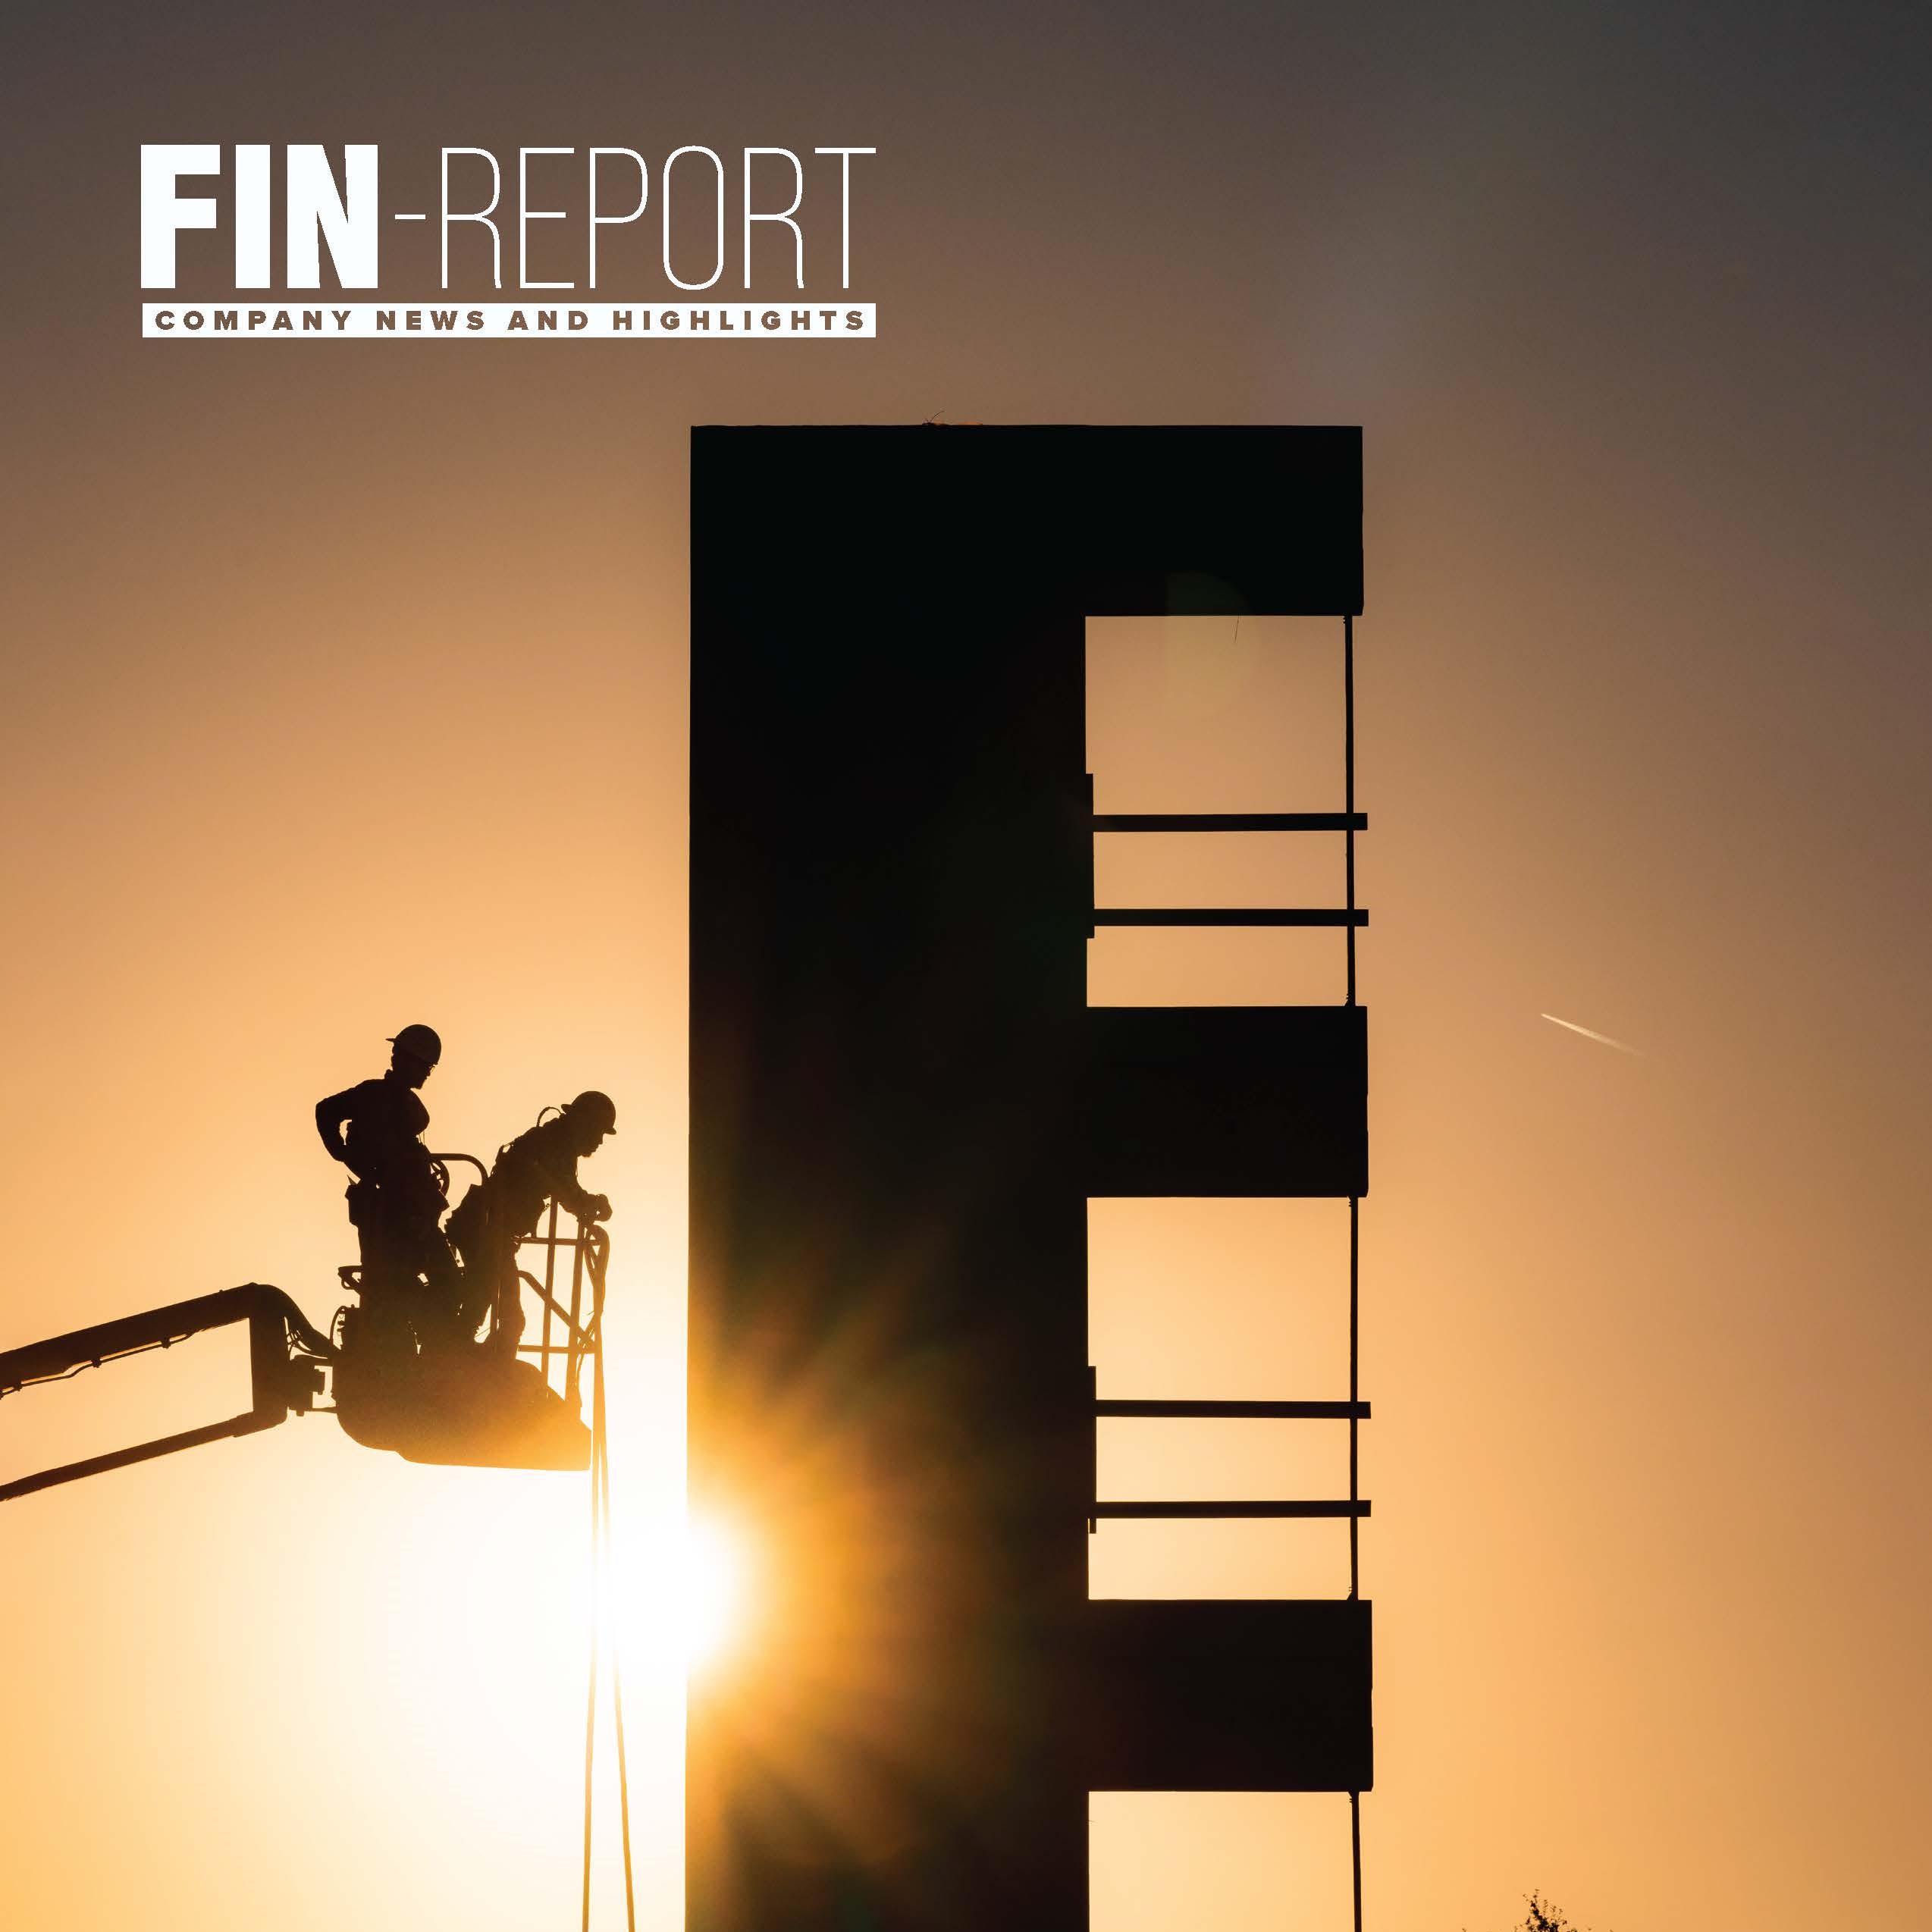 FIN-REPORT: COMPANY NEWS & HIGHLIGHTS